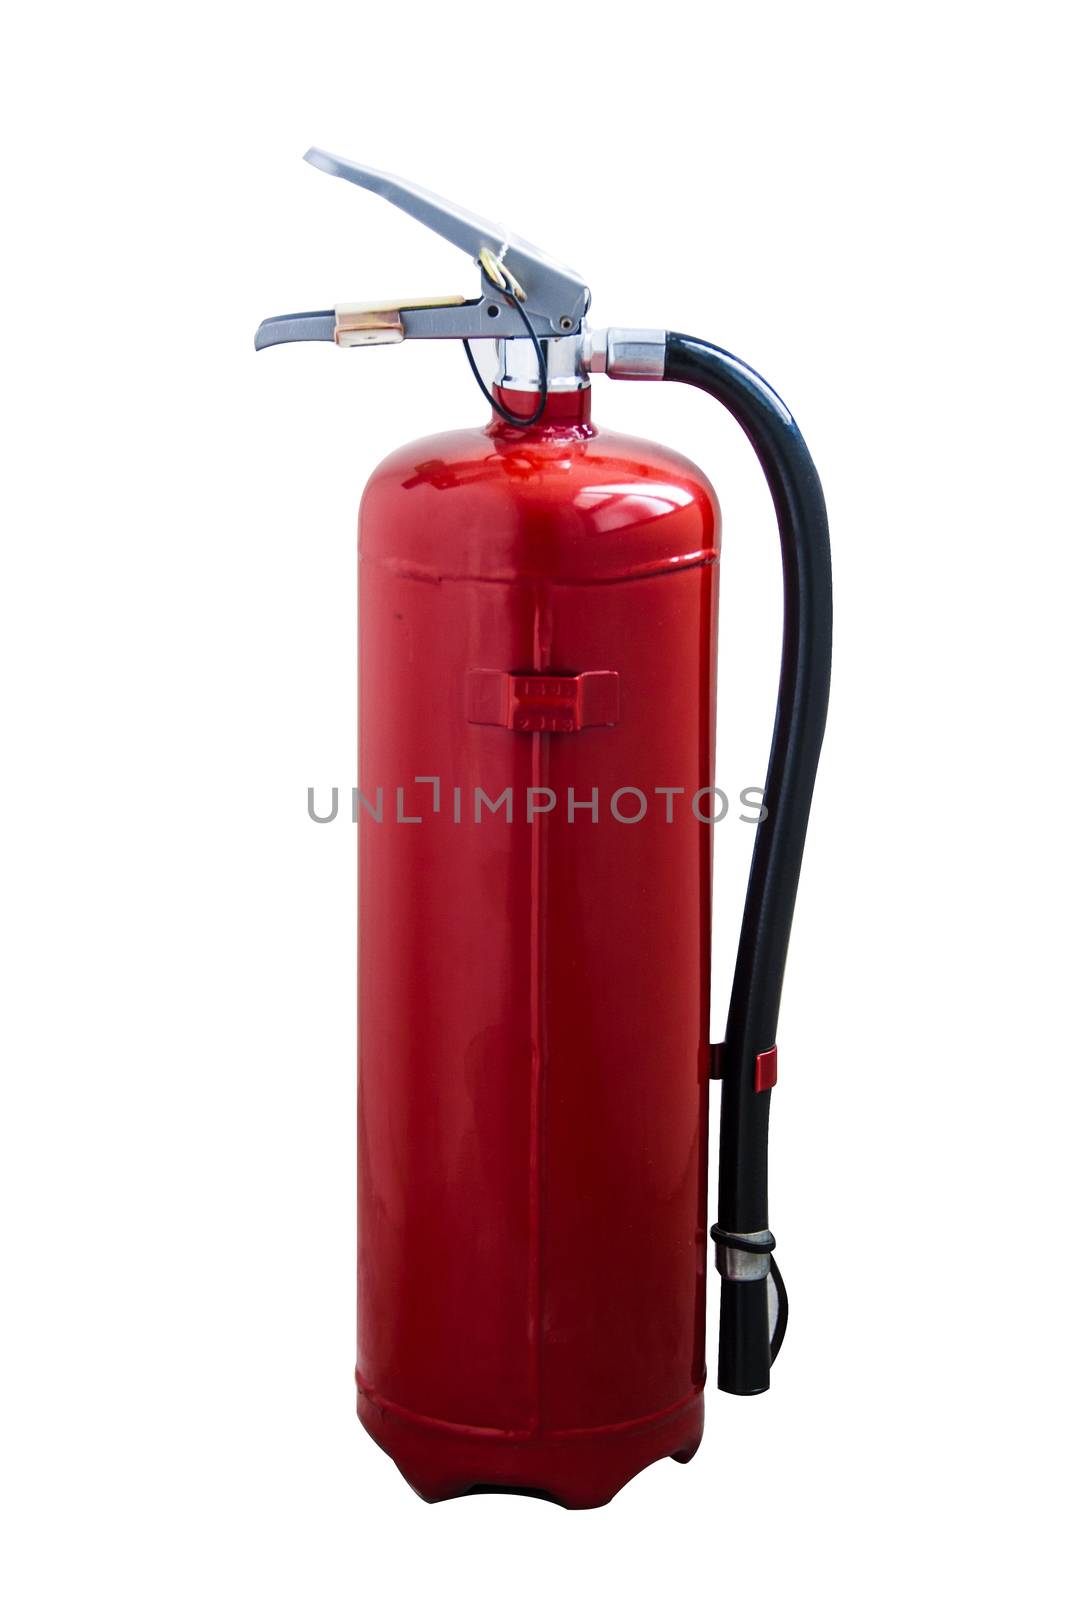 Portable Red fire extinguisher by yanukit